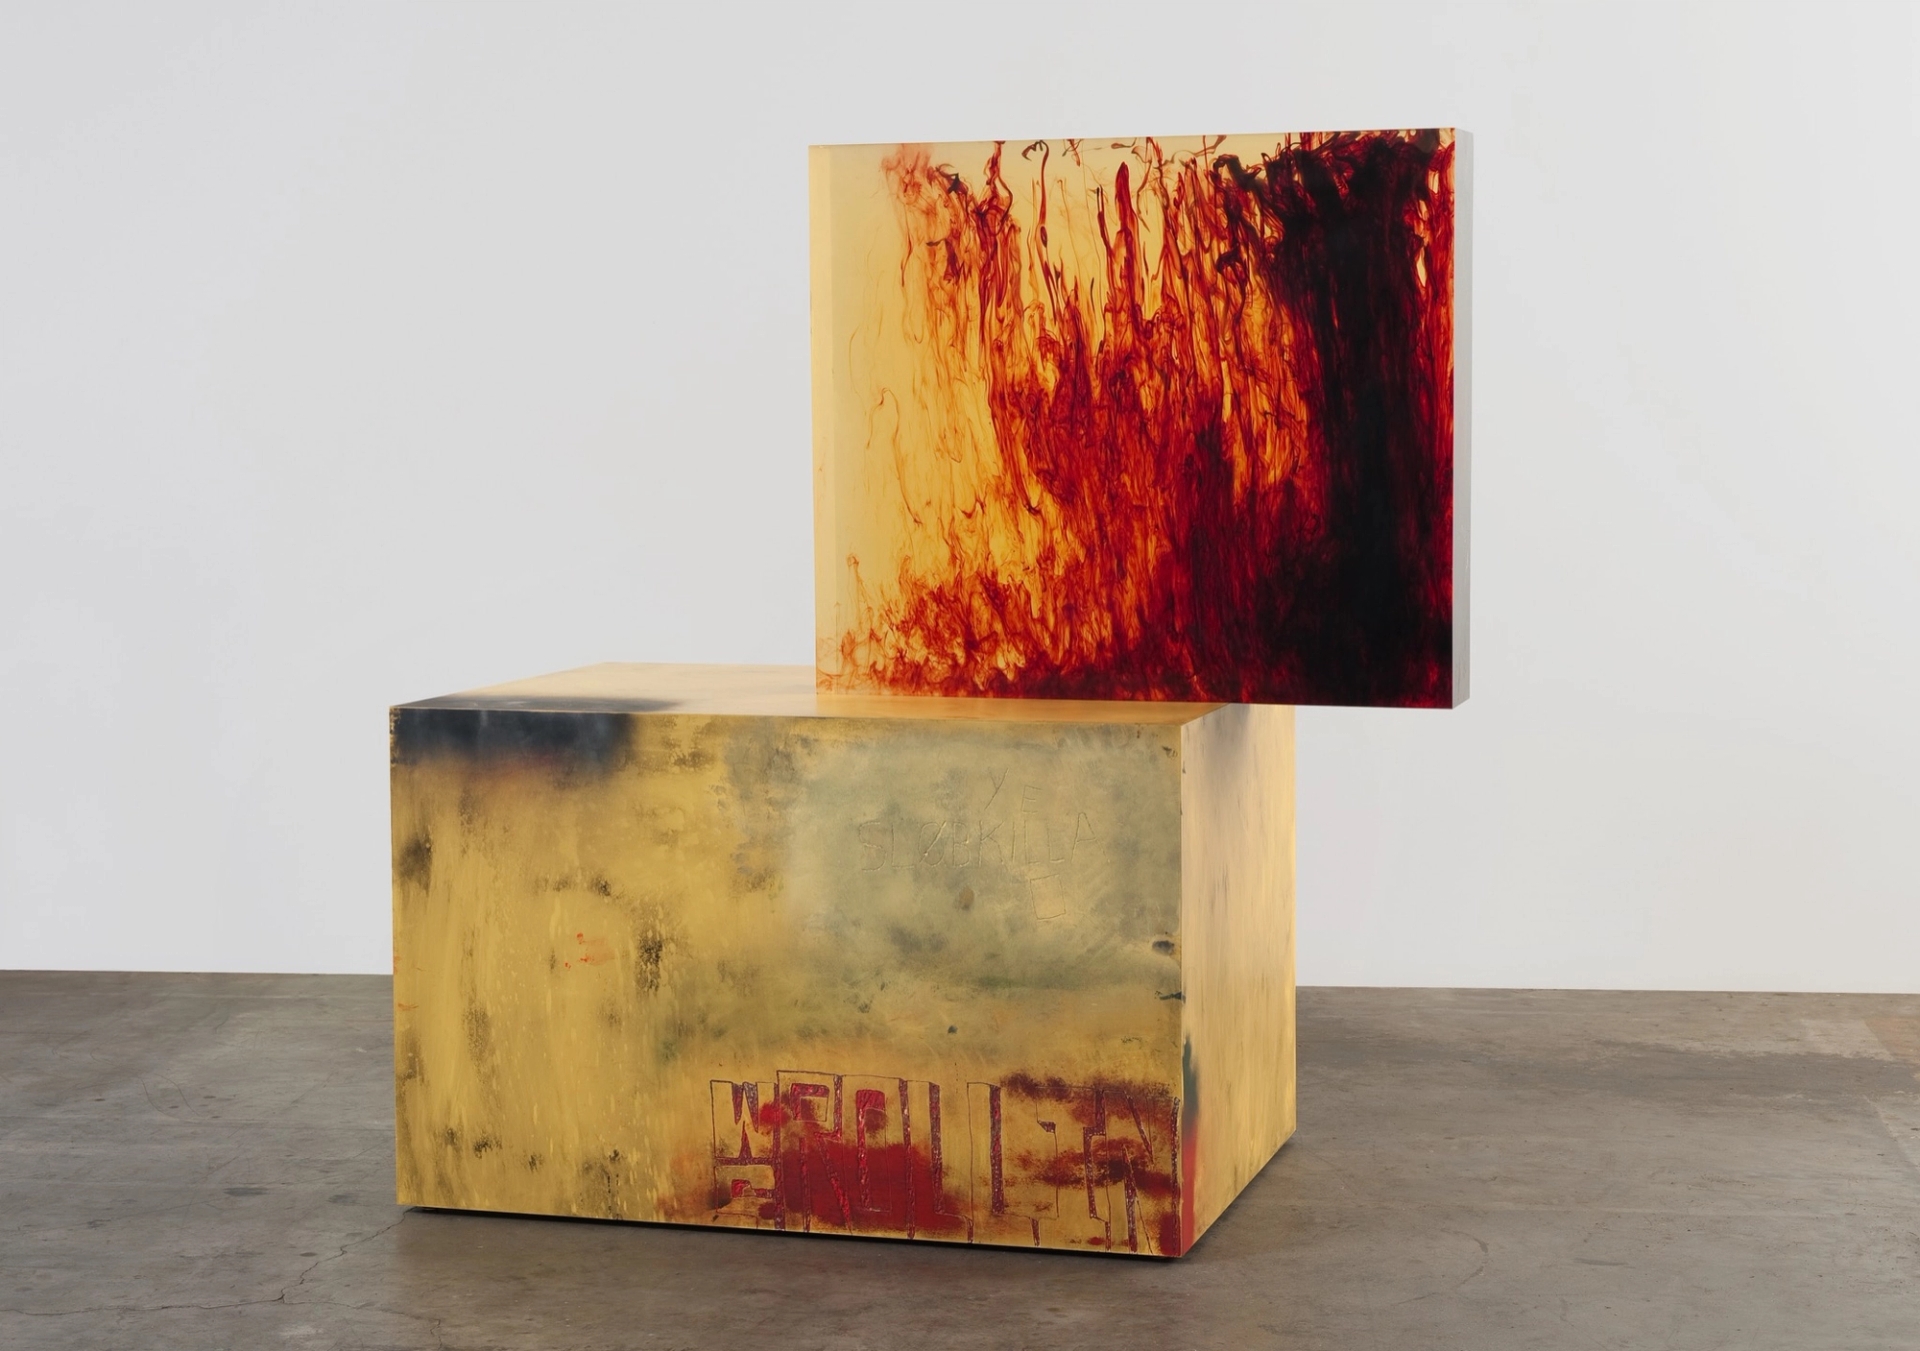 Sterling Ruby, ACTS/WS ROLLIN, 2011. Clear urethane block, dye, wood, spray paint, and formica. Collection of Institute of Contemporary Art, Miami. Courtesy Sterling Ruby Studio. Photo: Robert Wedemeyer.